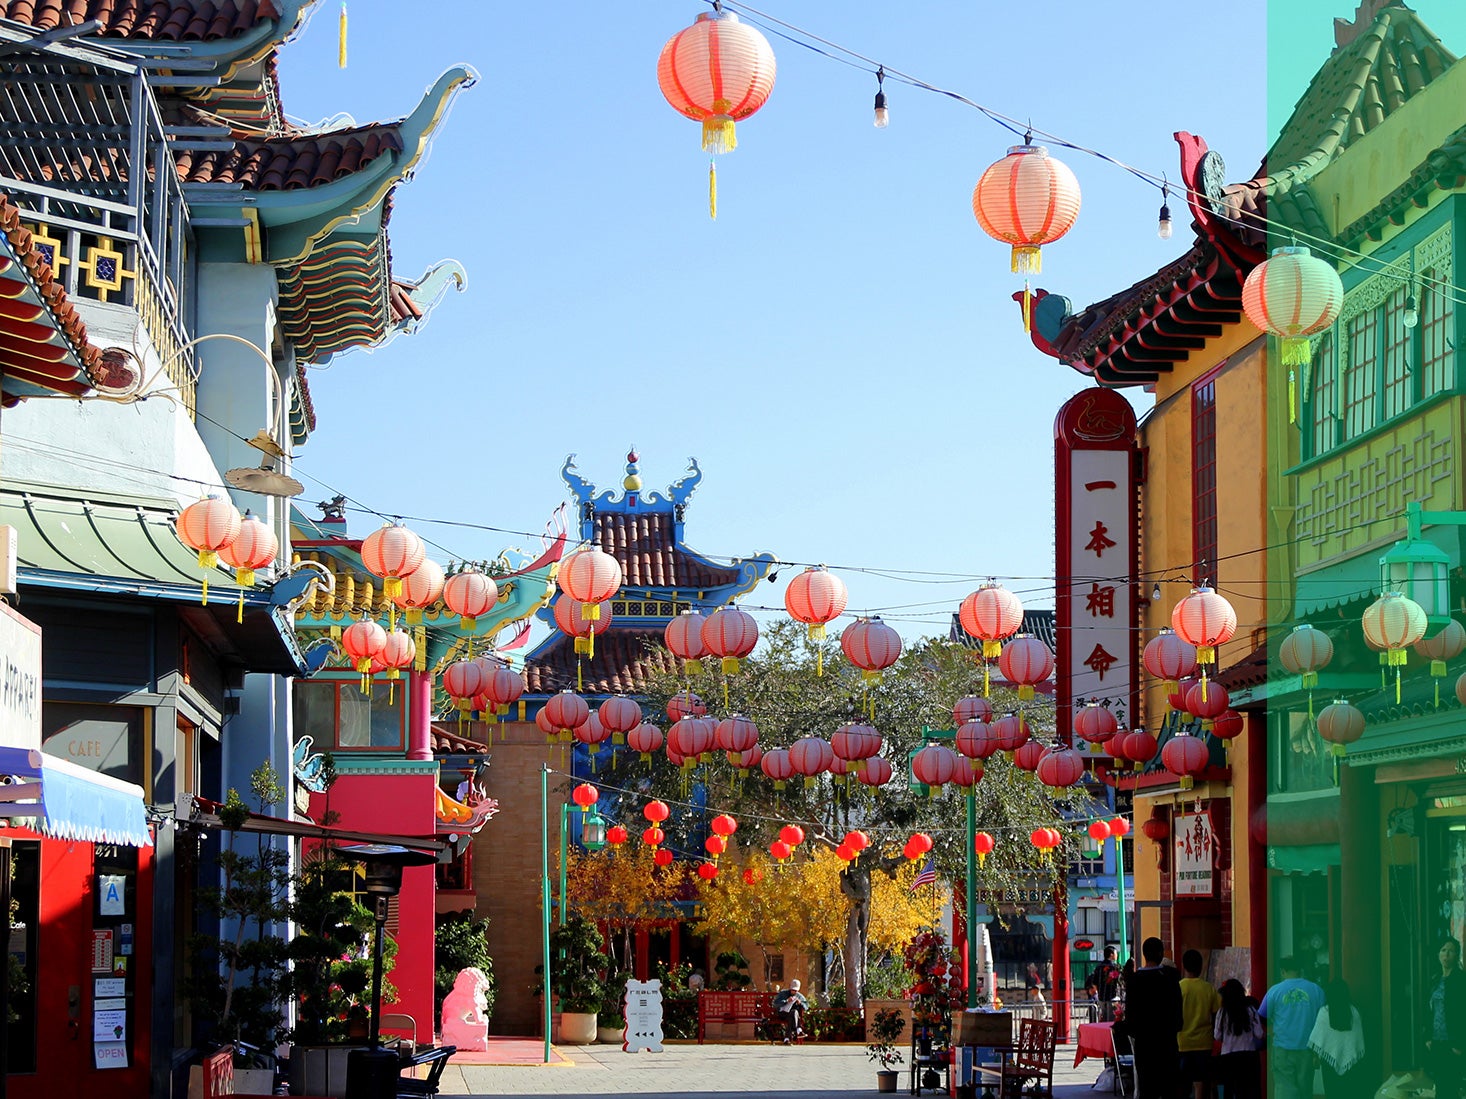 L.A.’s colorful Chinatown pops against bright blue skies.